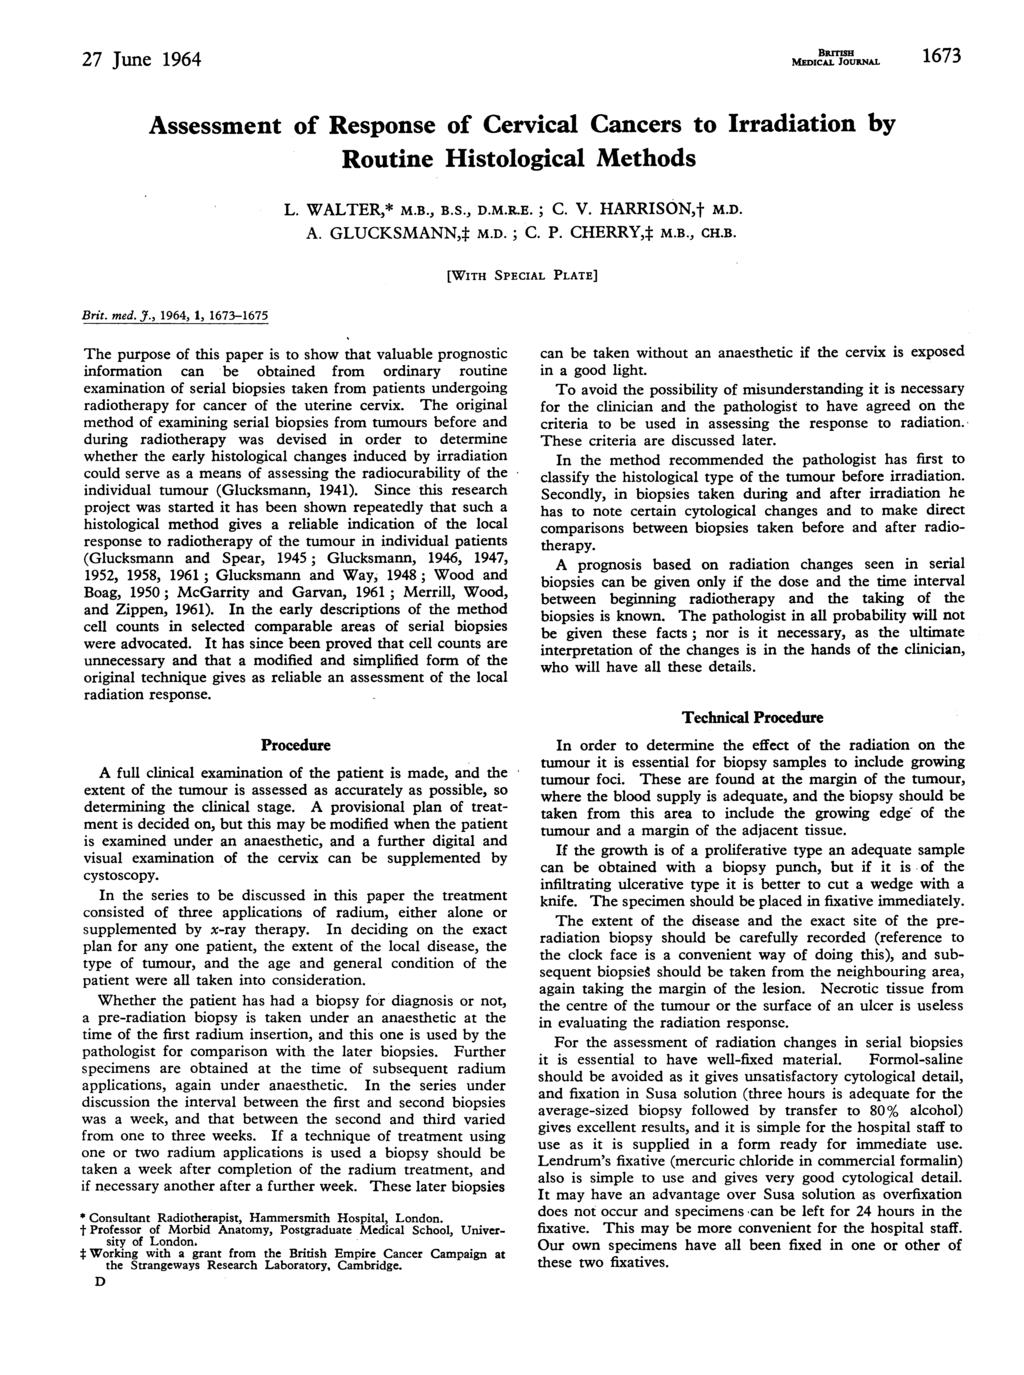 27 Junr~e 1964 MEDICAL JOURNAL 1673 Assessment of Response of Cervicl Cncers to Irrdition by Routine Histologicl Methods Brit. med. J'., 1964, 1, 1673-1675 L. WALTER,* M.B., B.S., D.M.R.E.; C. V.